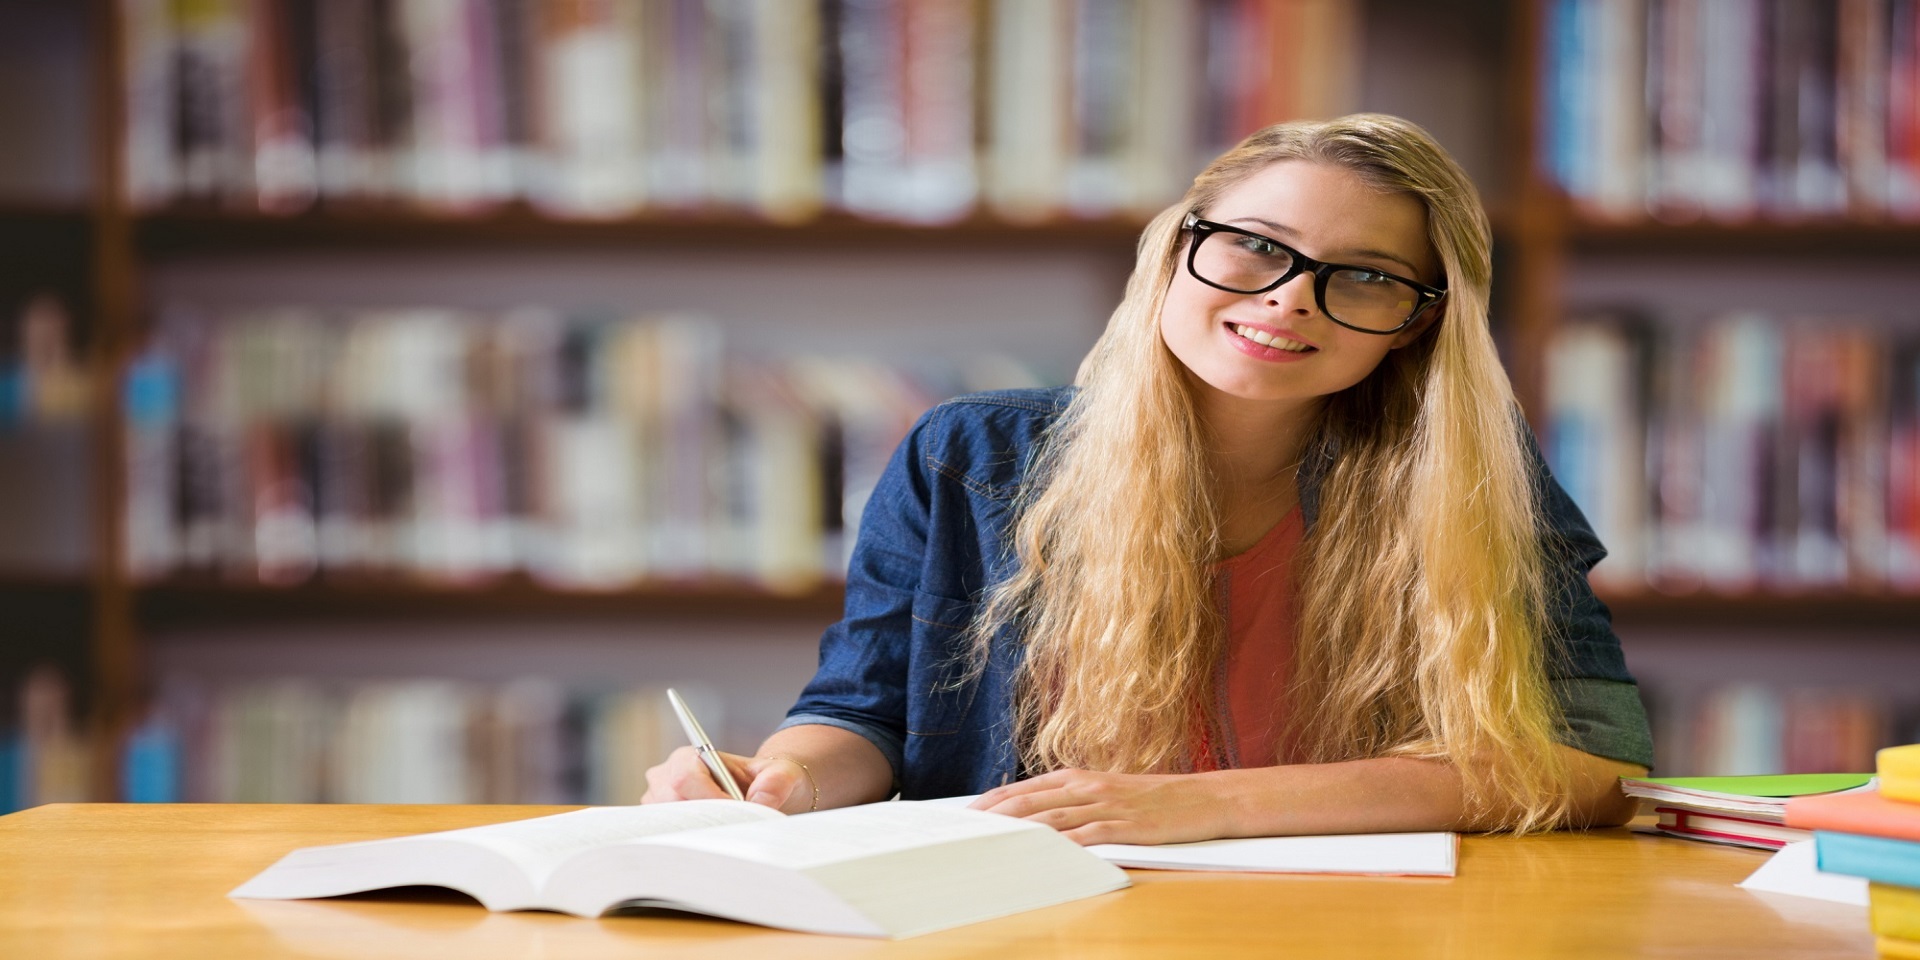 Case Study Writing Services - Up To 30% Discount | The Assignment Helpline